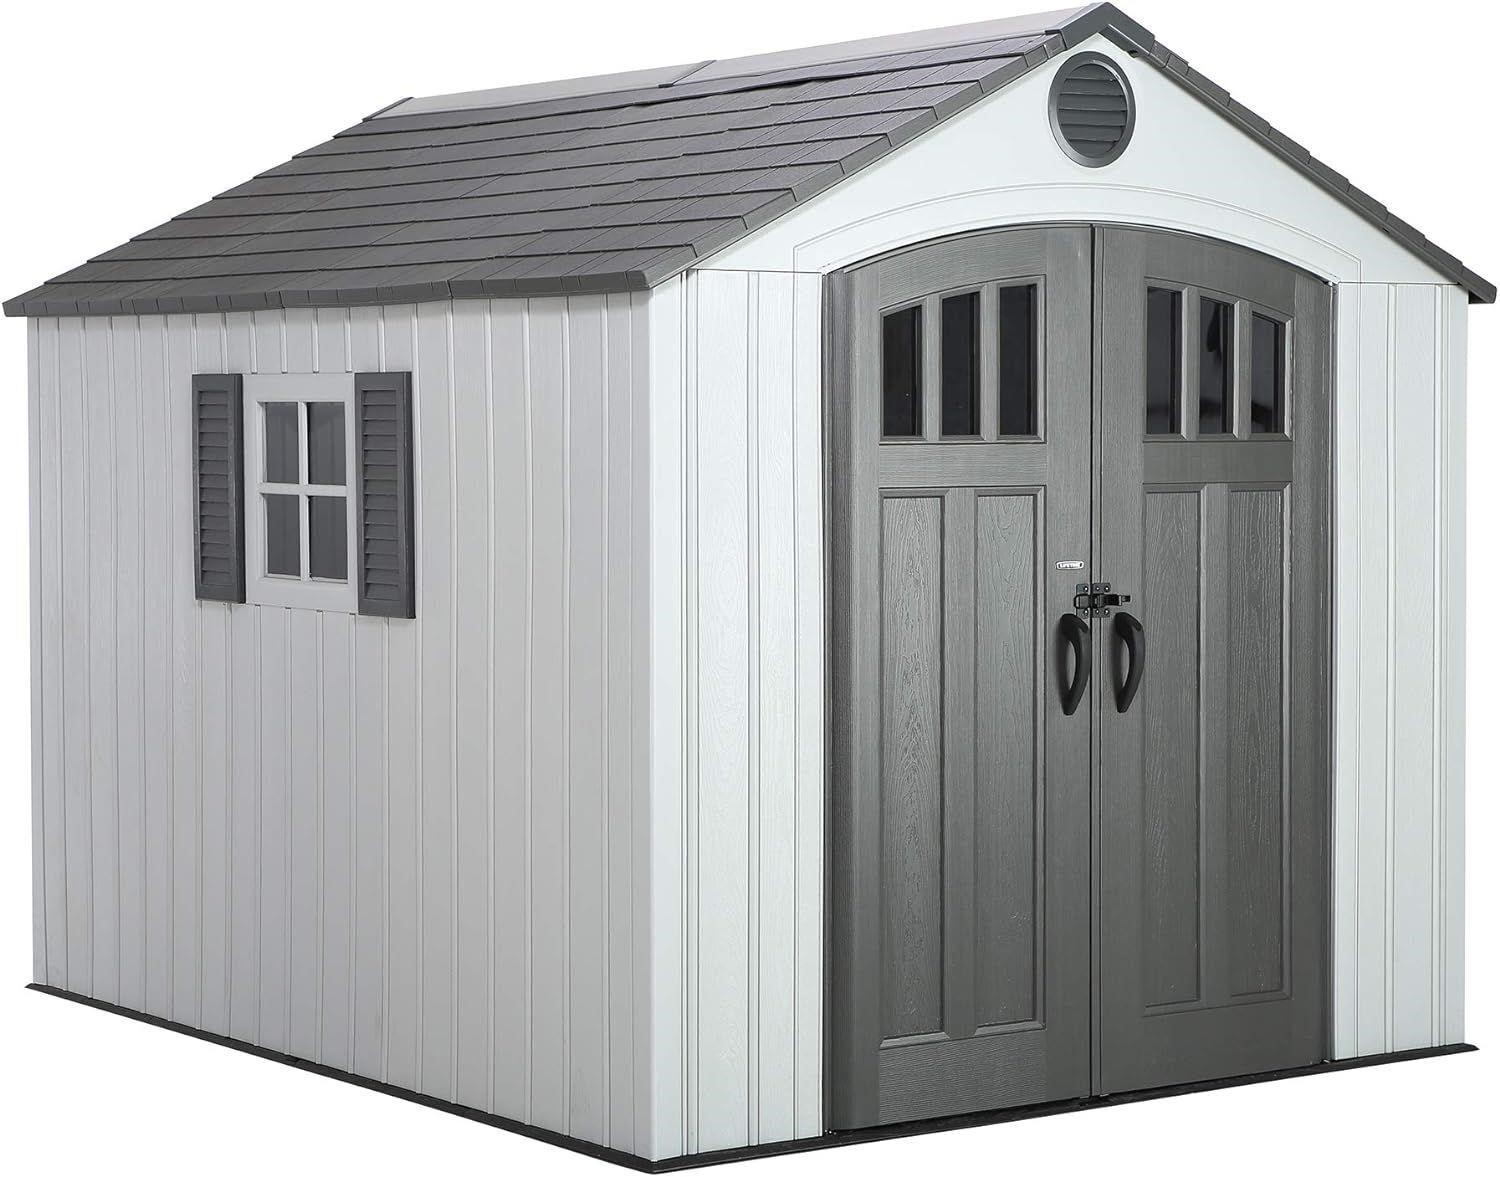 Lifetime 8 x 10 Ft. Outdoor Storage Shed, Gray